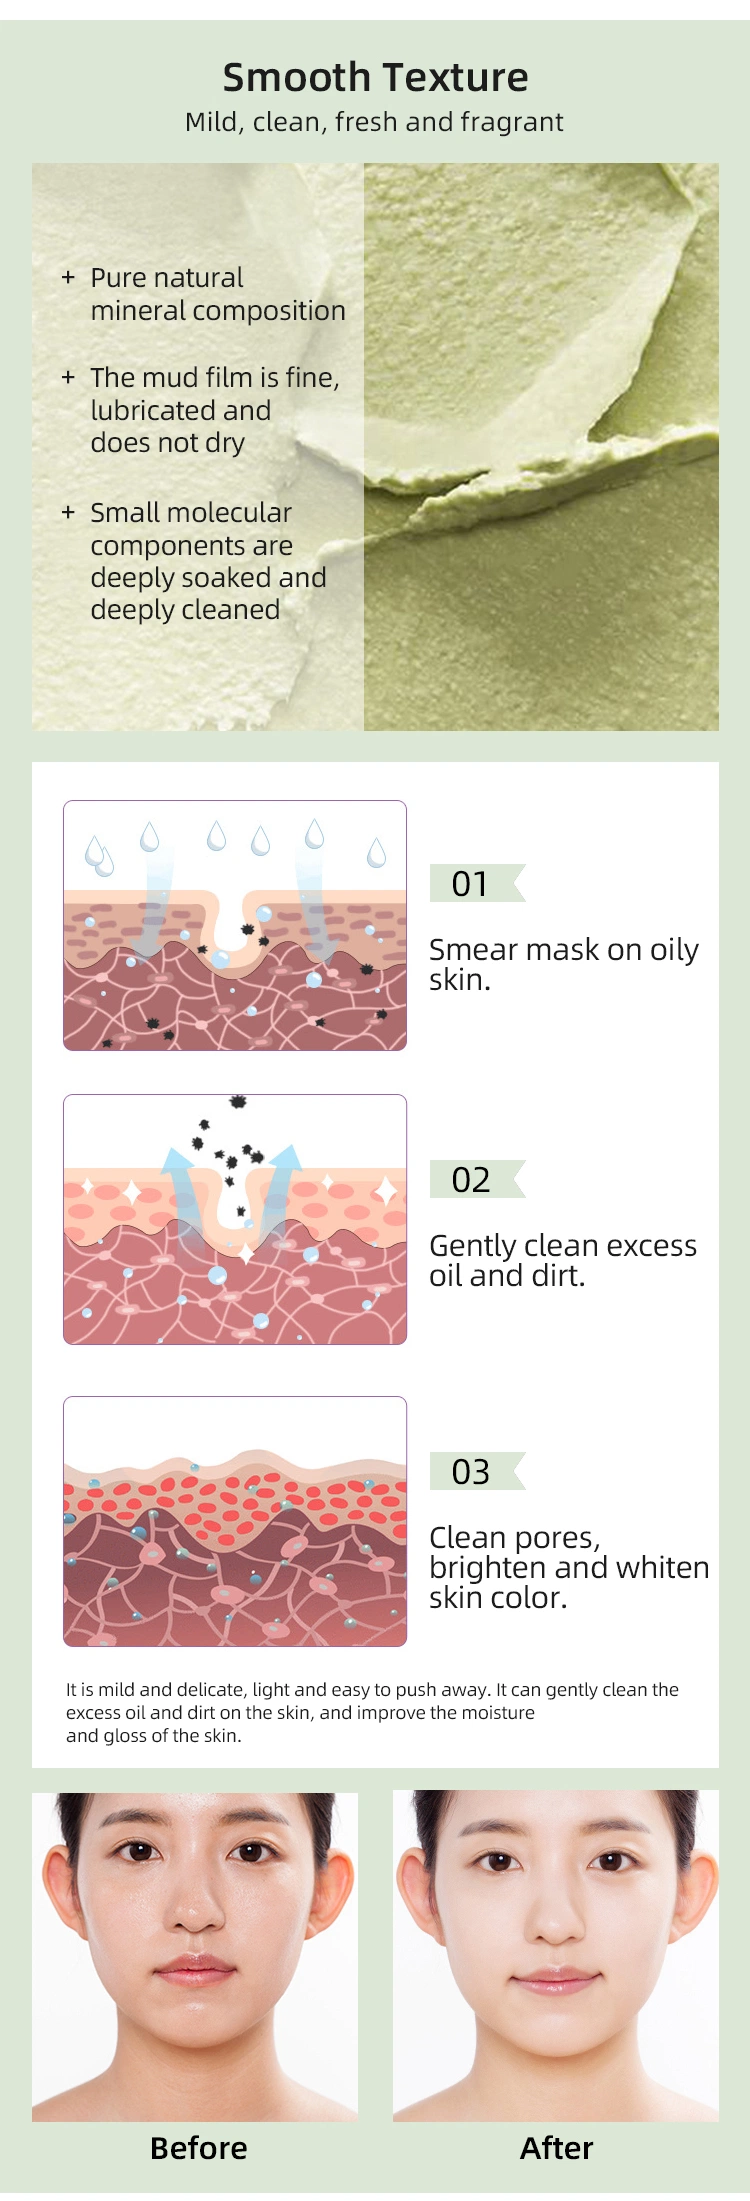 Skin Care Facial Mask Cleansing with Recover Protect Skin Stick Facial Mud Mask